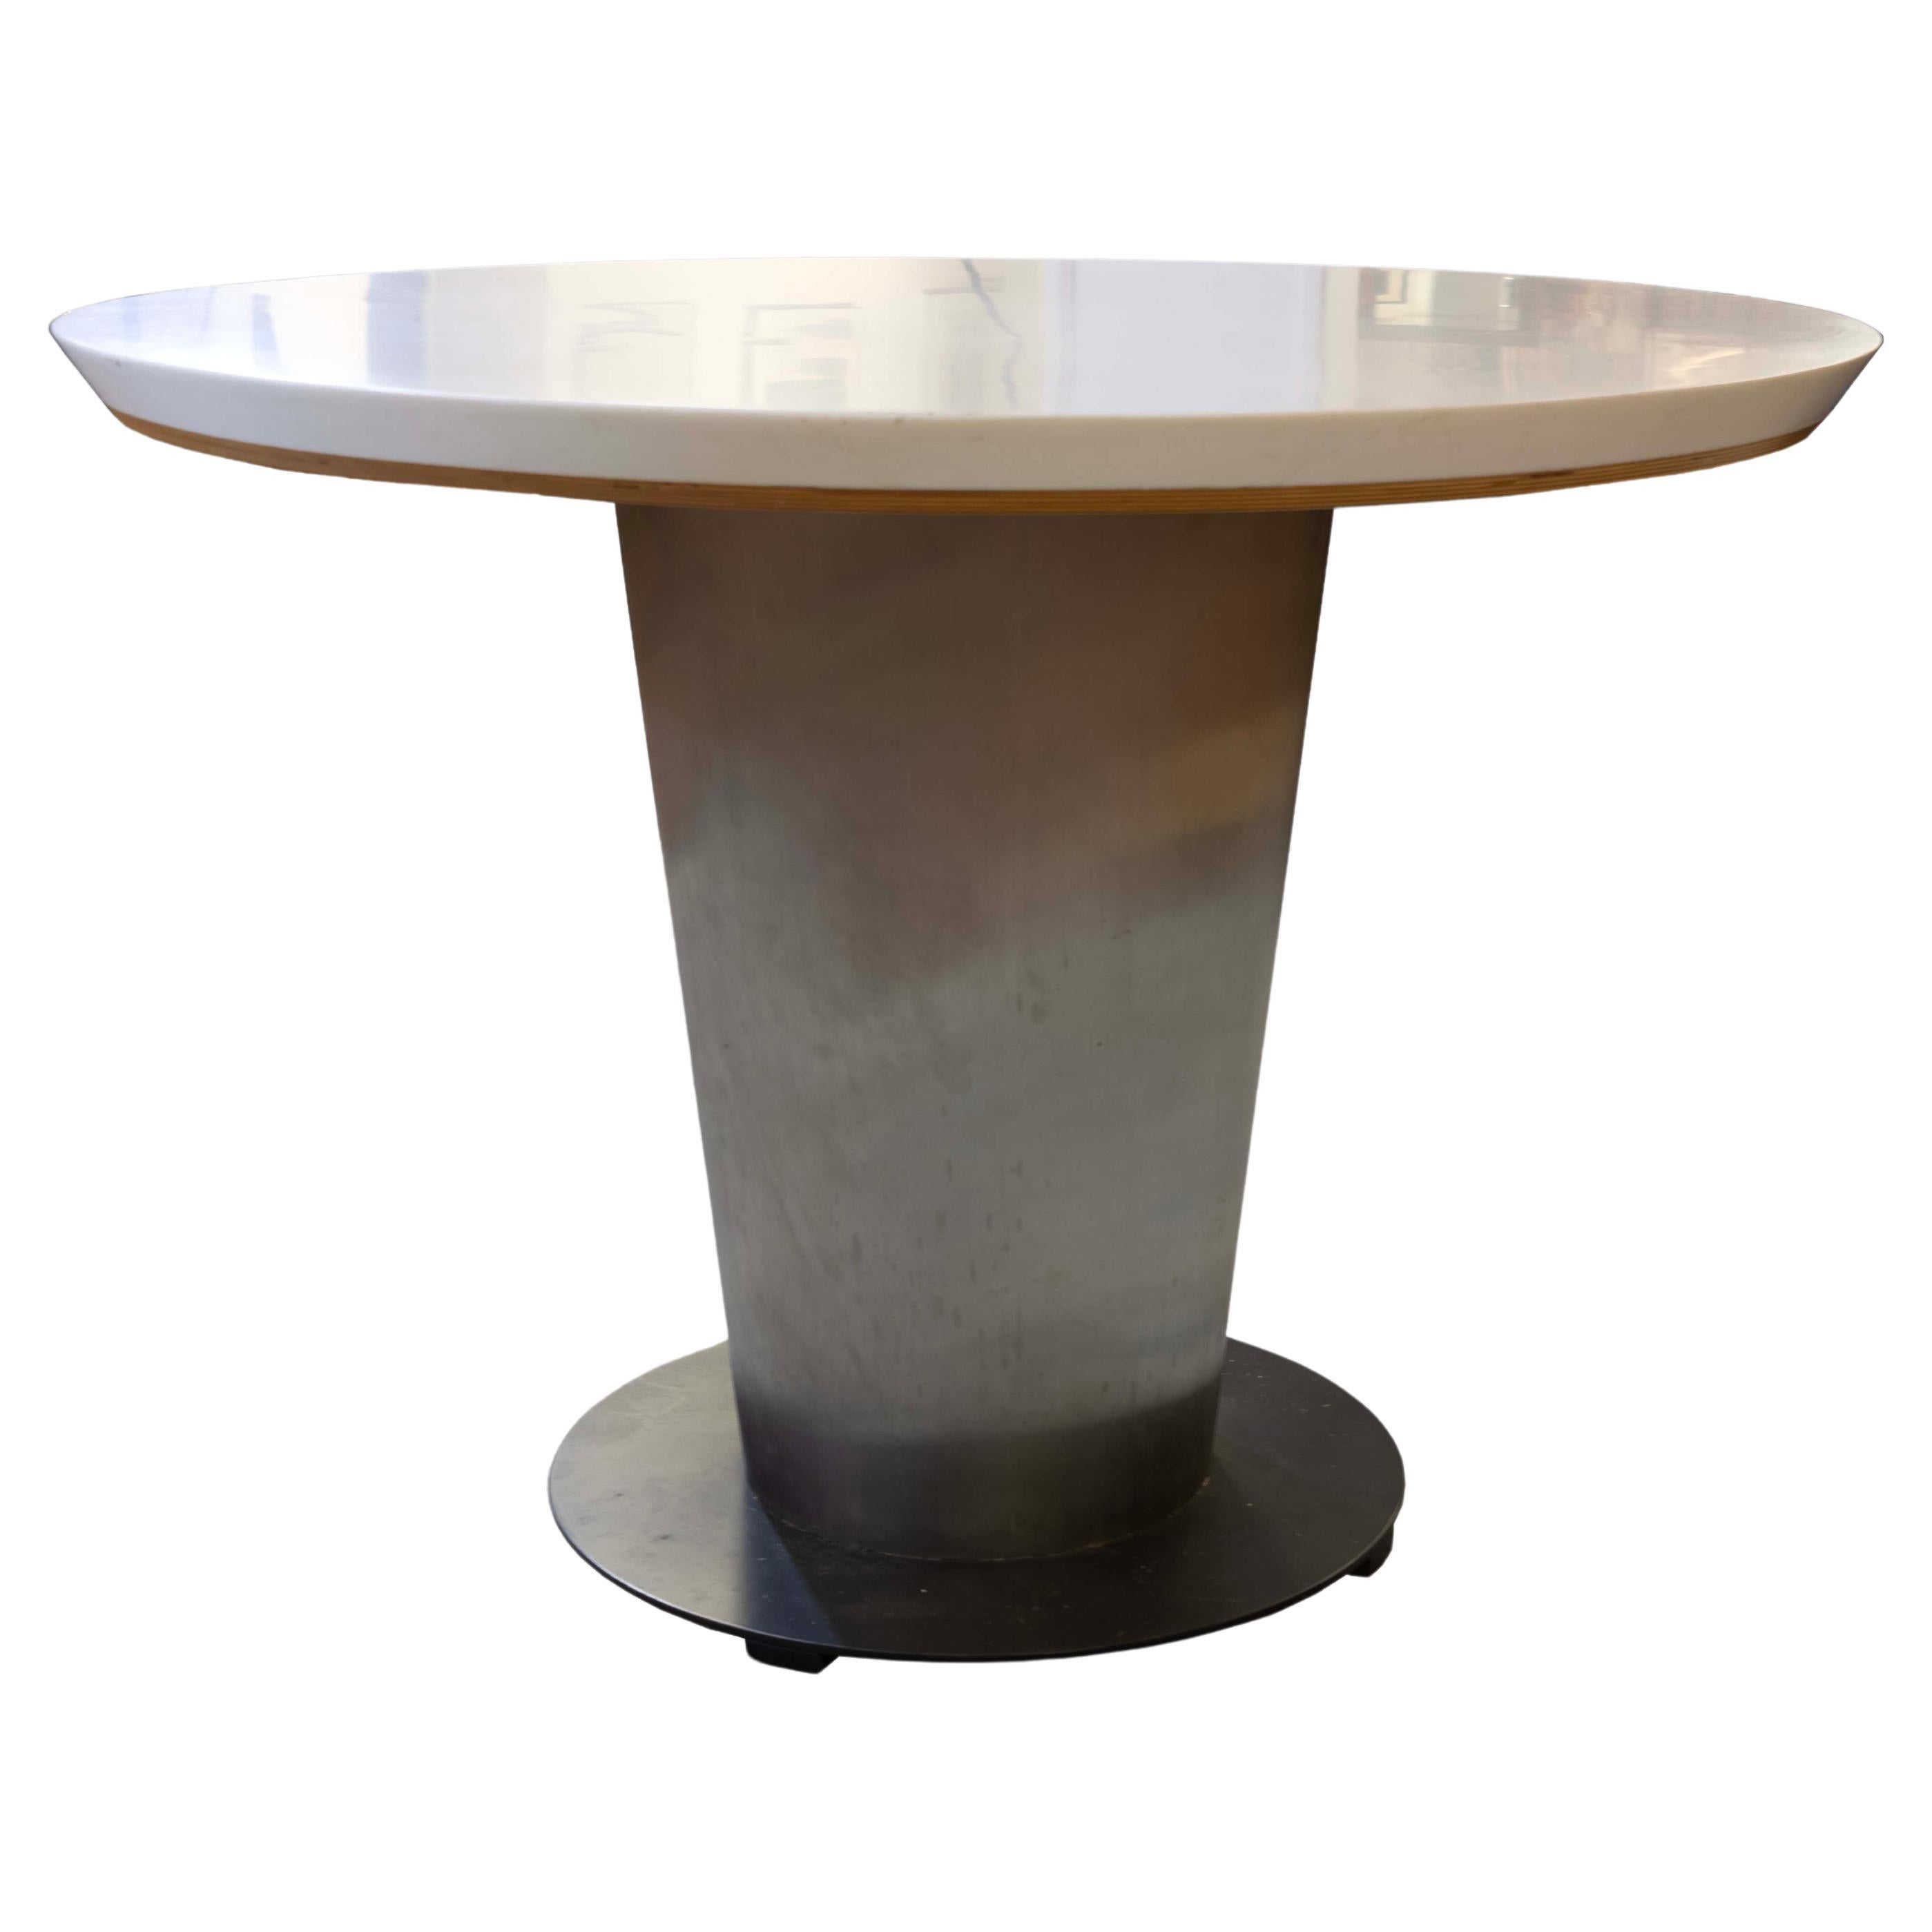 This contemporary modern dinette table features a sturdy metal pedestal base with a sleek, round laminate top. The table's design combines functionality with a minimalist aesthetic, highlighted by the contrast between the metallic finish of the base